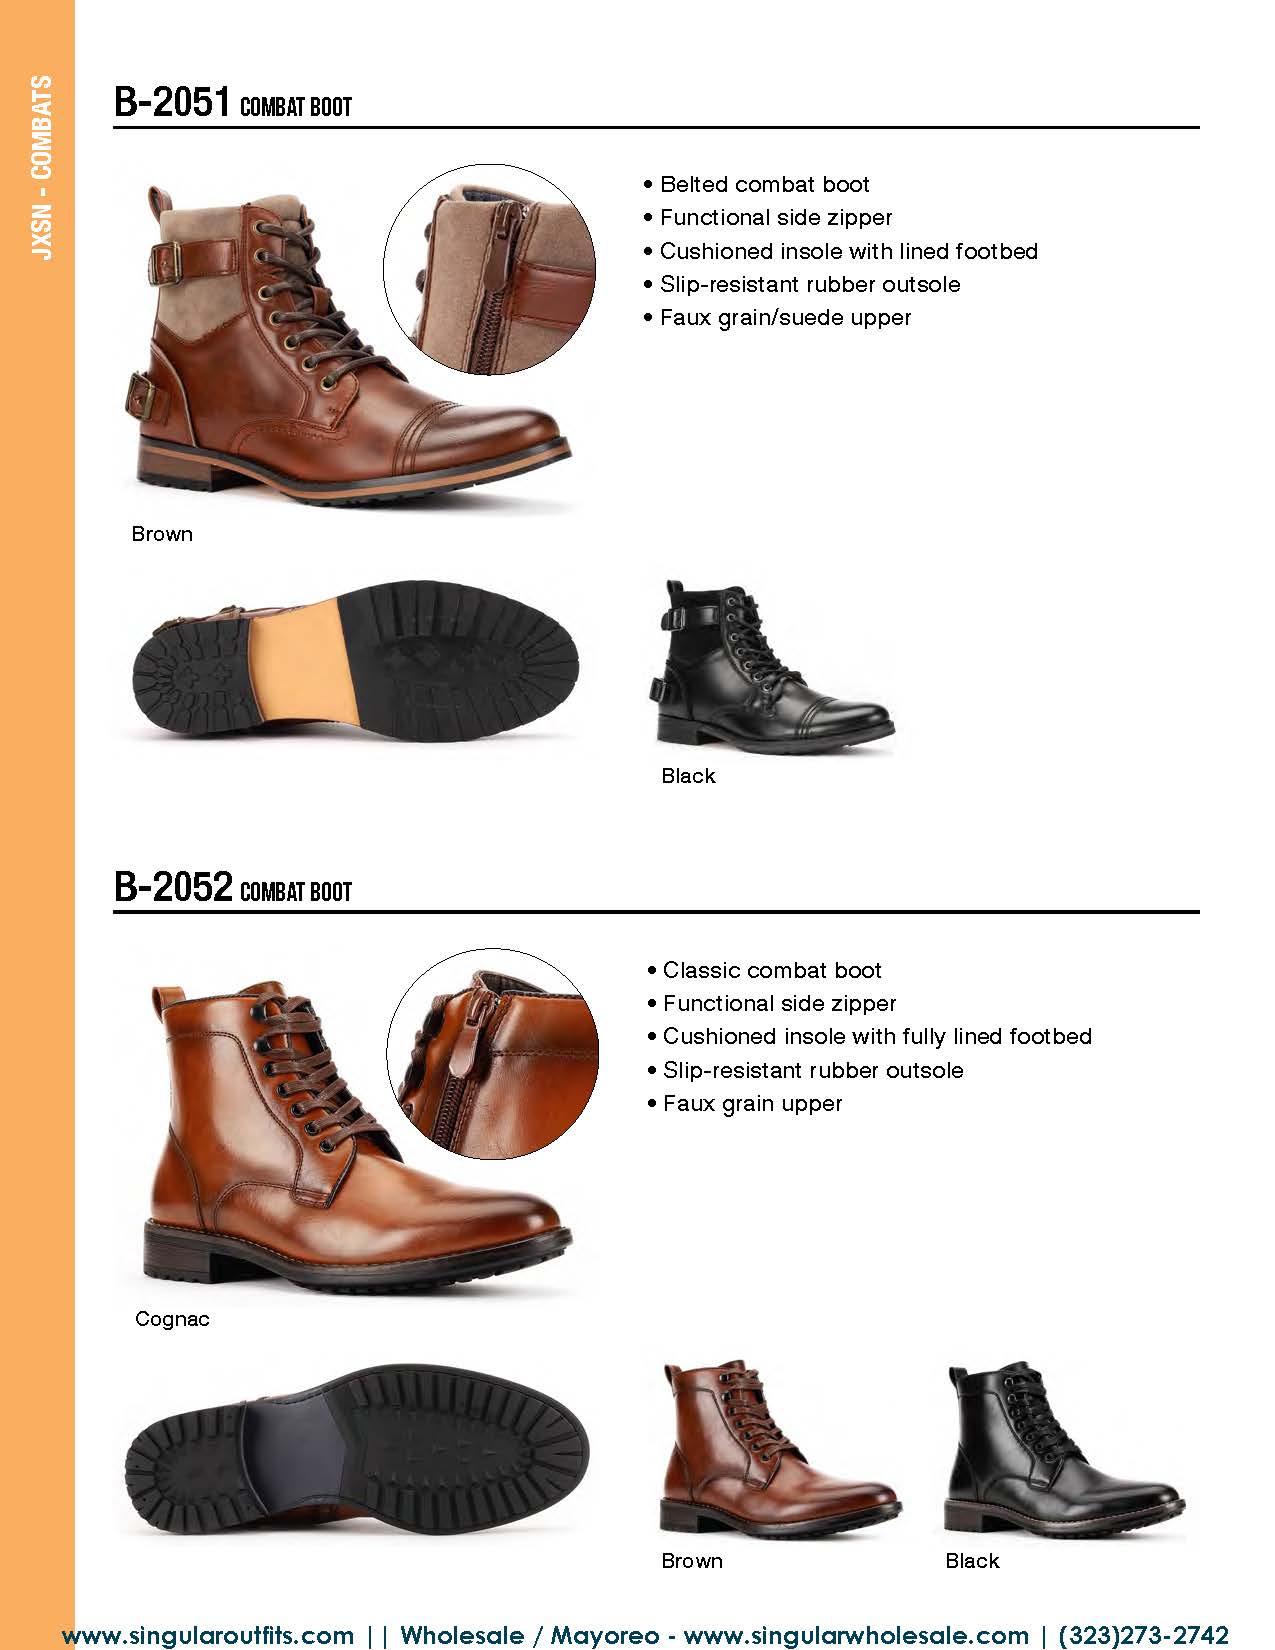 Casual and Formal Shoes for Men Vol.2